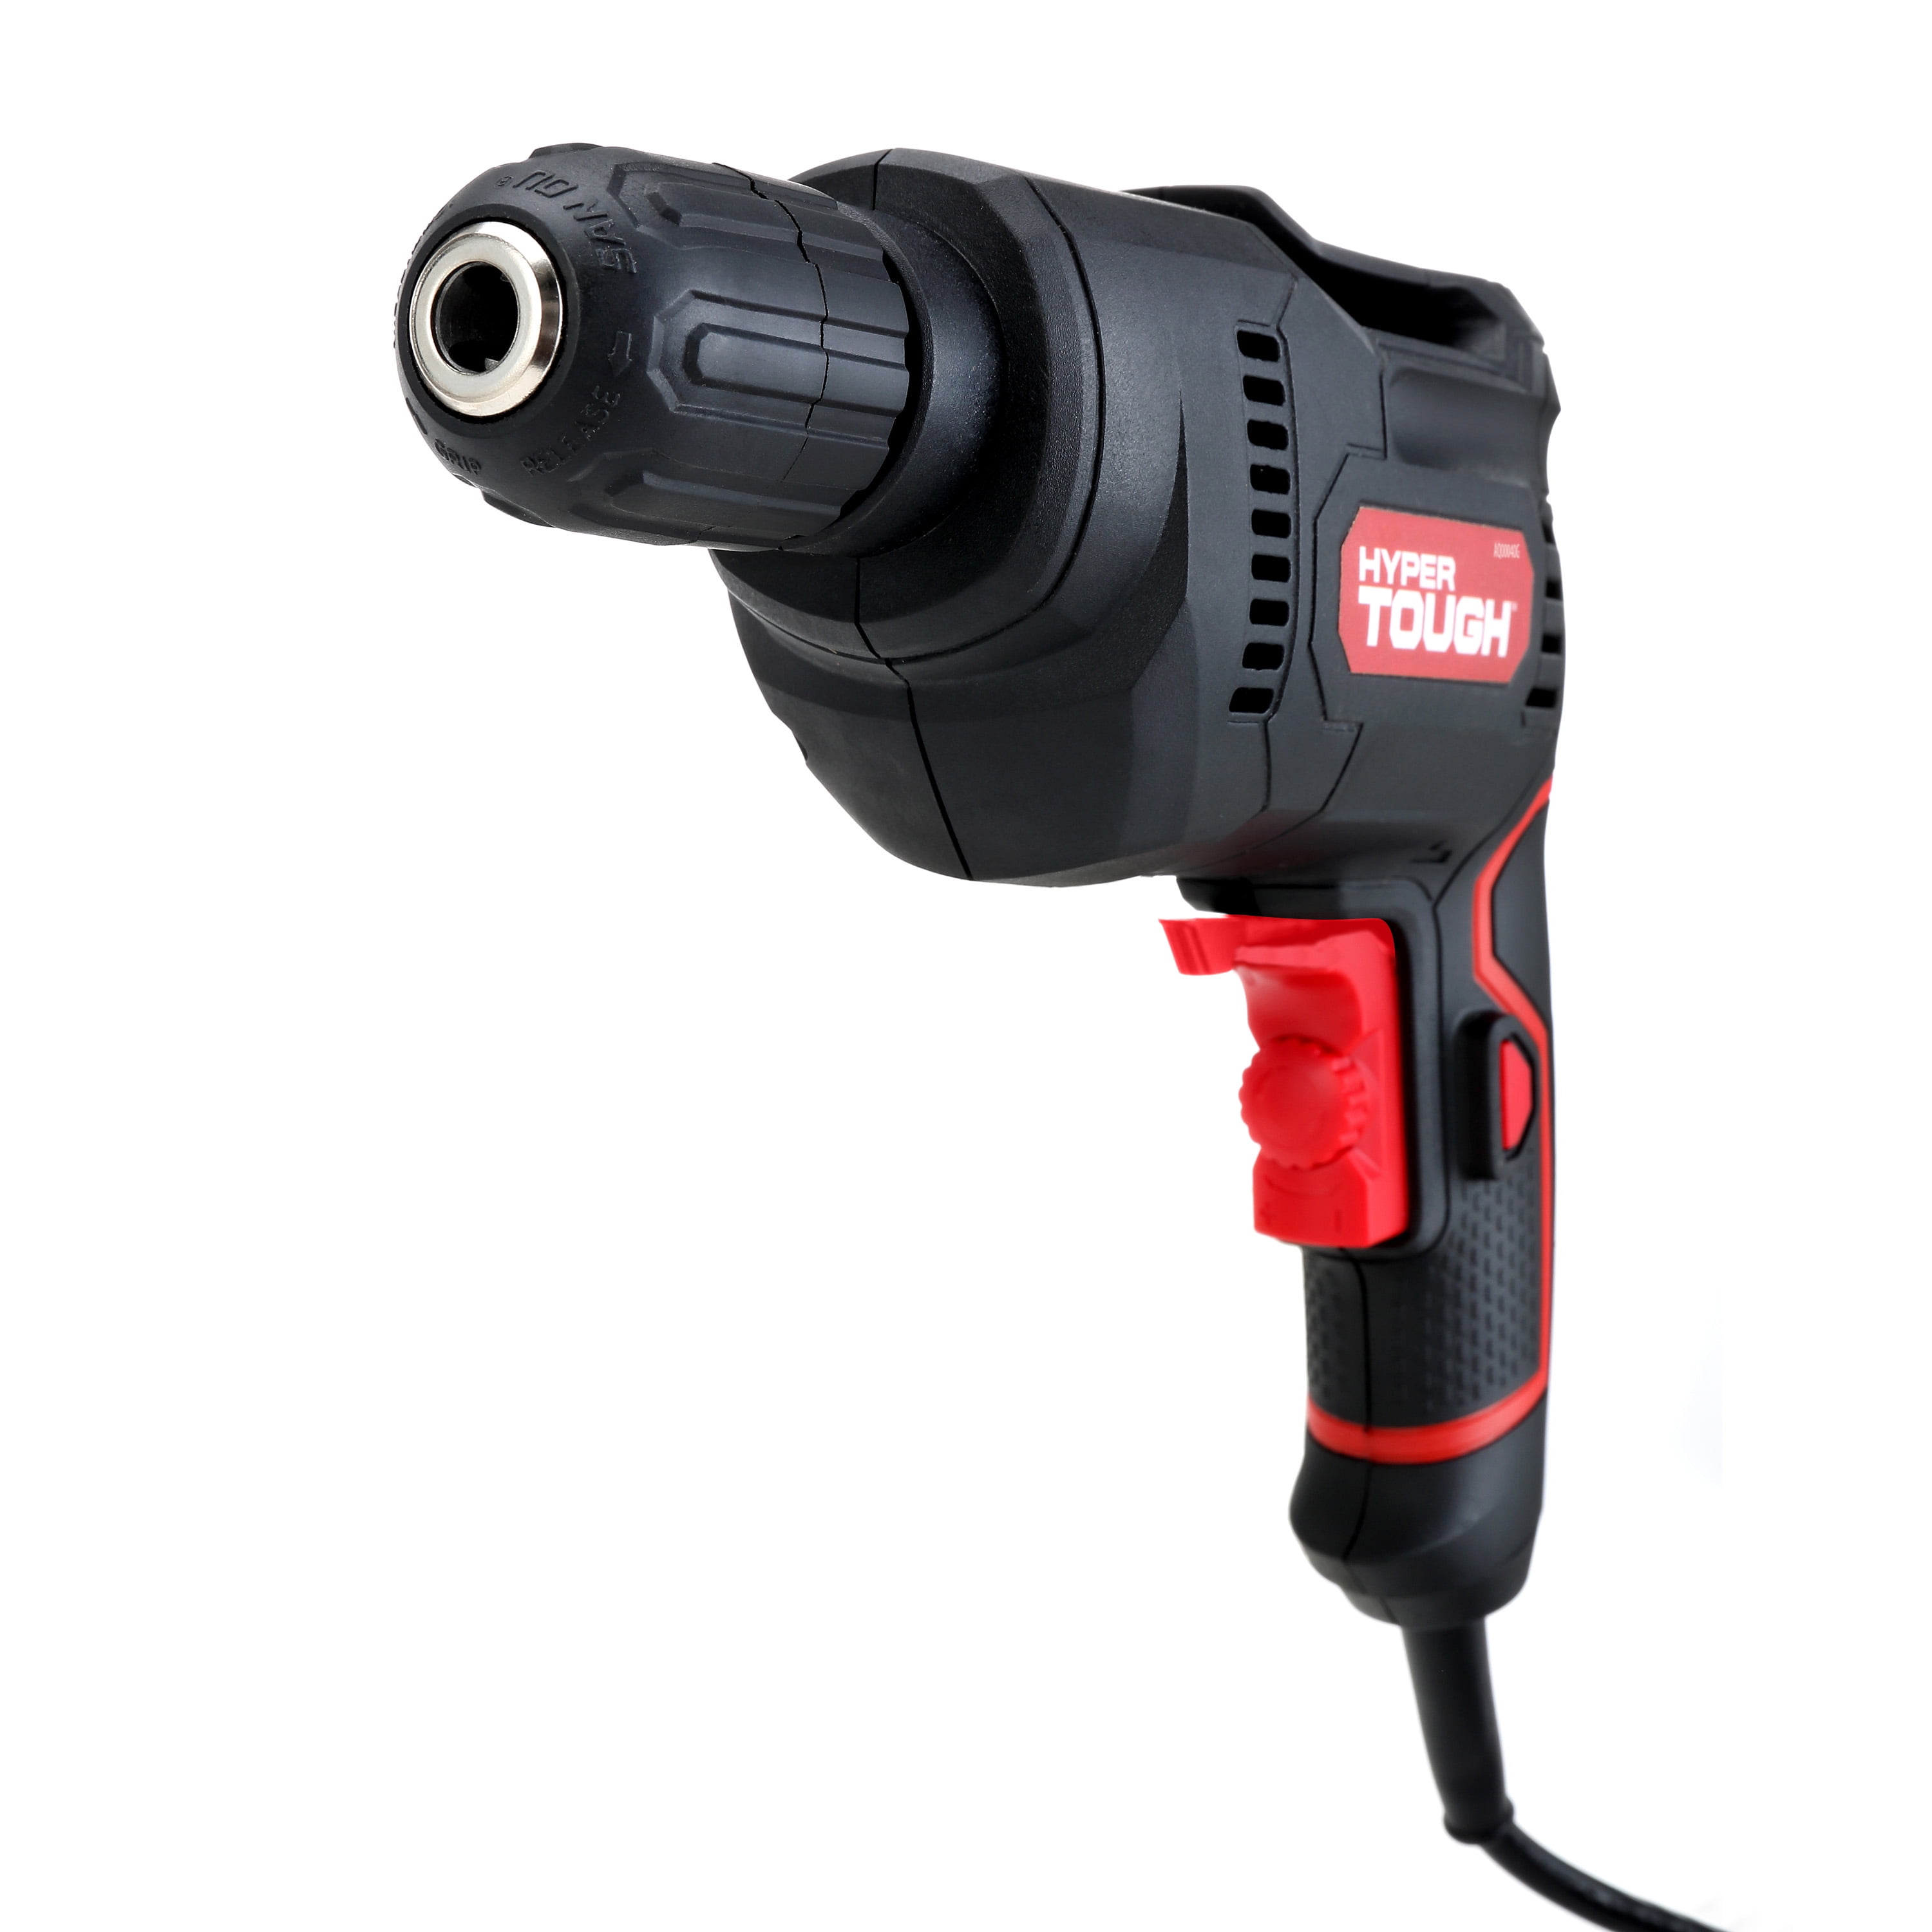 Corded Drill, 5.5-Amp, 3/8-Inch